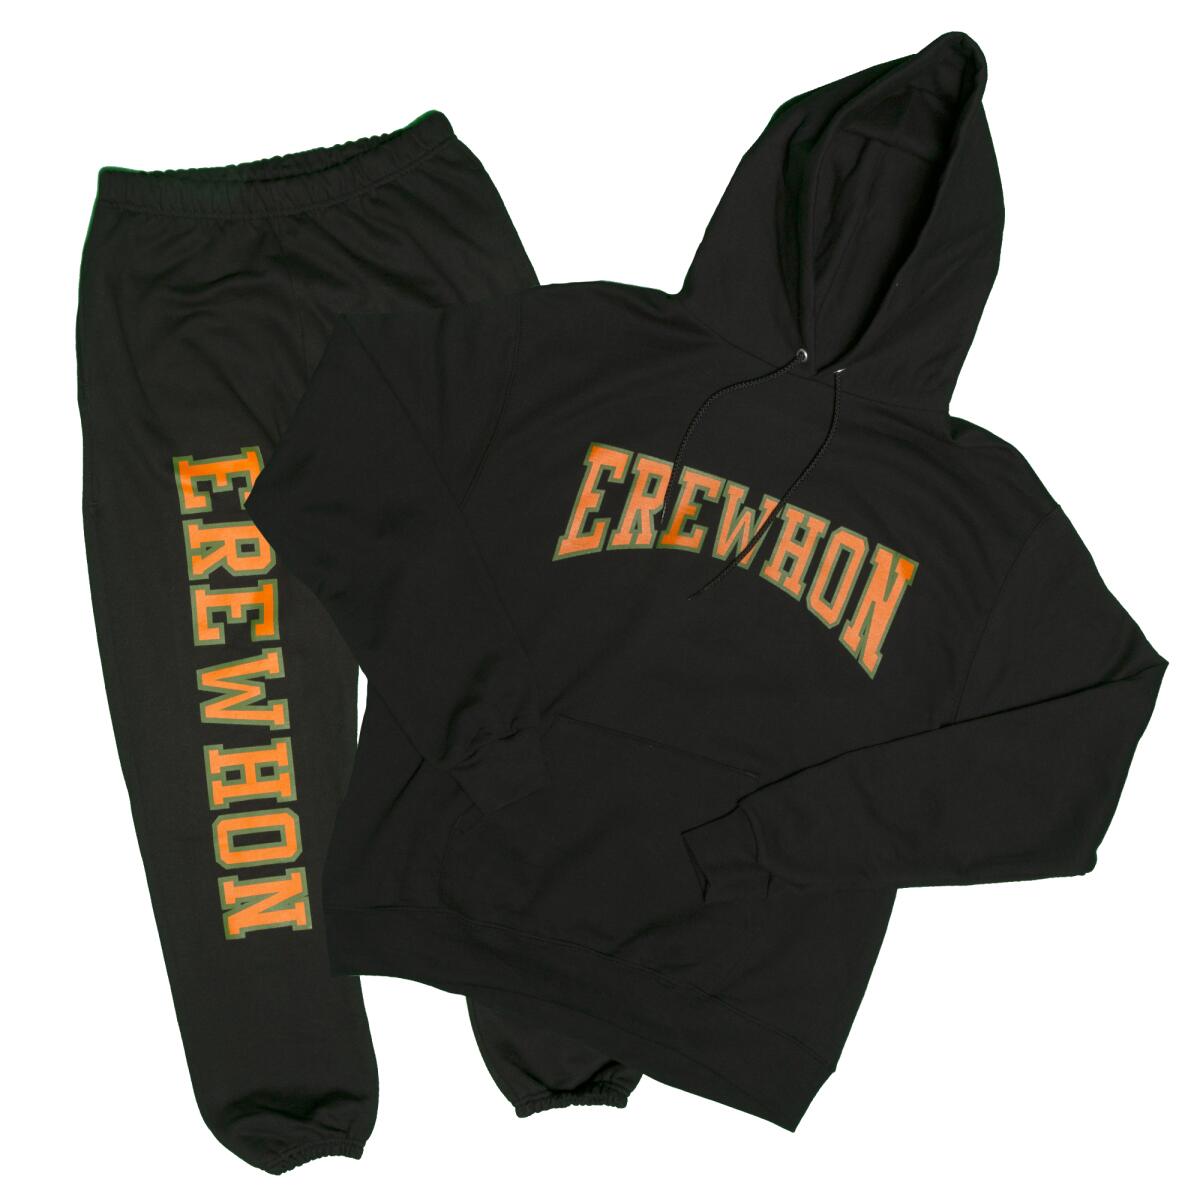 A sweatsuit created by Pizzaslime for upscale grocer Erewhon.